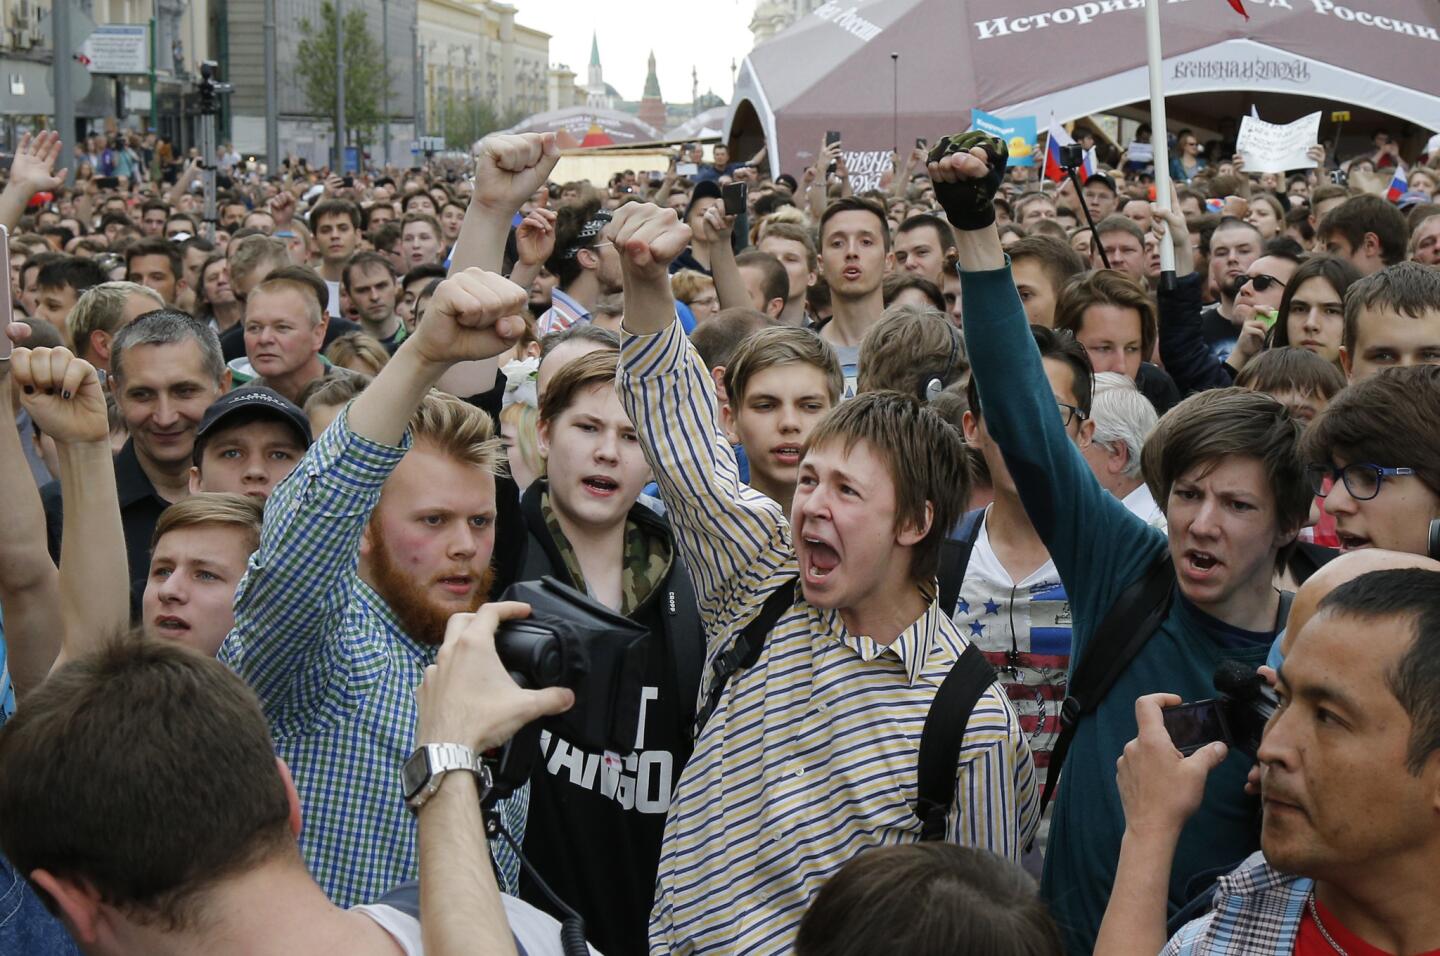 Protesters shout out and gesture during a demonstration in downtown Moscow. Russian opposition leader Alexei Navalny, aiming to repeat the nationwide protests that rattled the Kremlin three months ago, has called for a last-minute location change for a Moscow demonstration that could provoke confrontations with police.